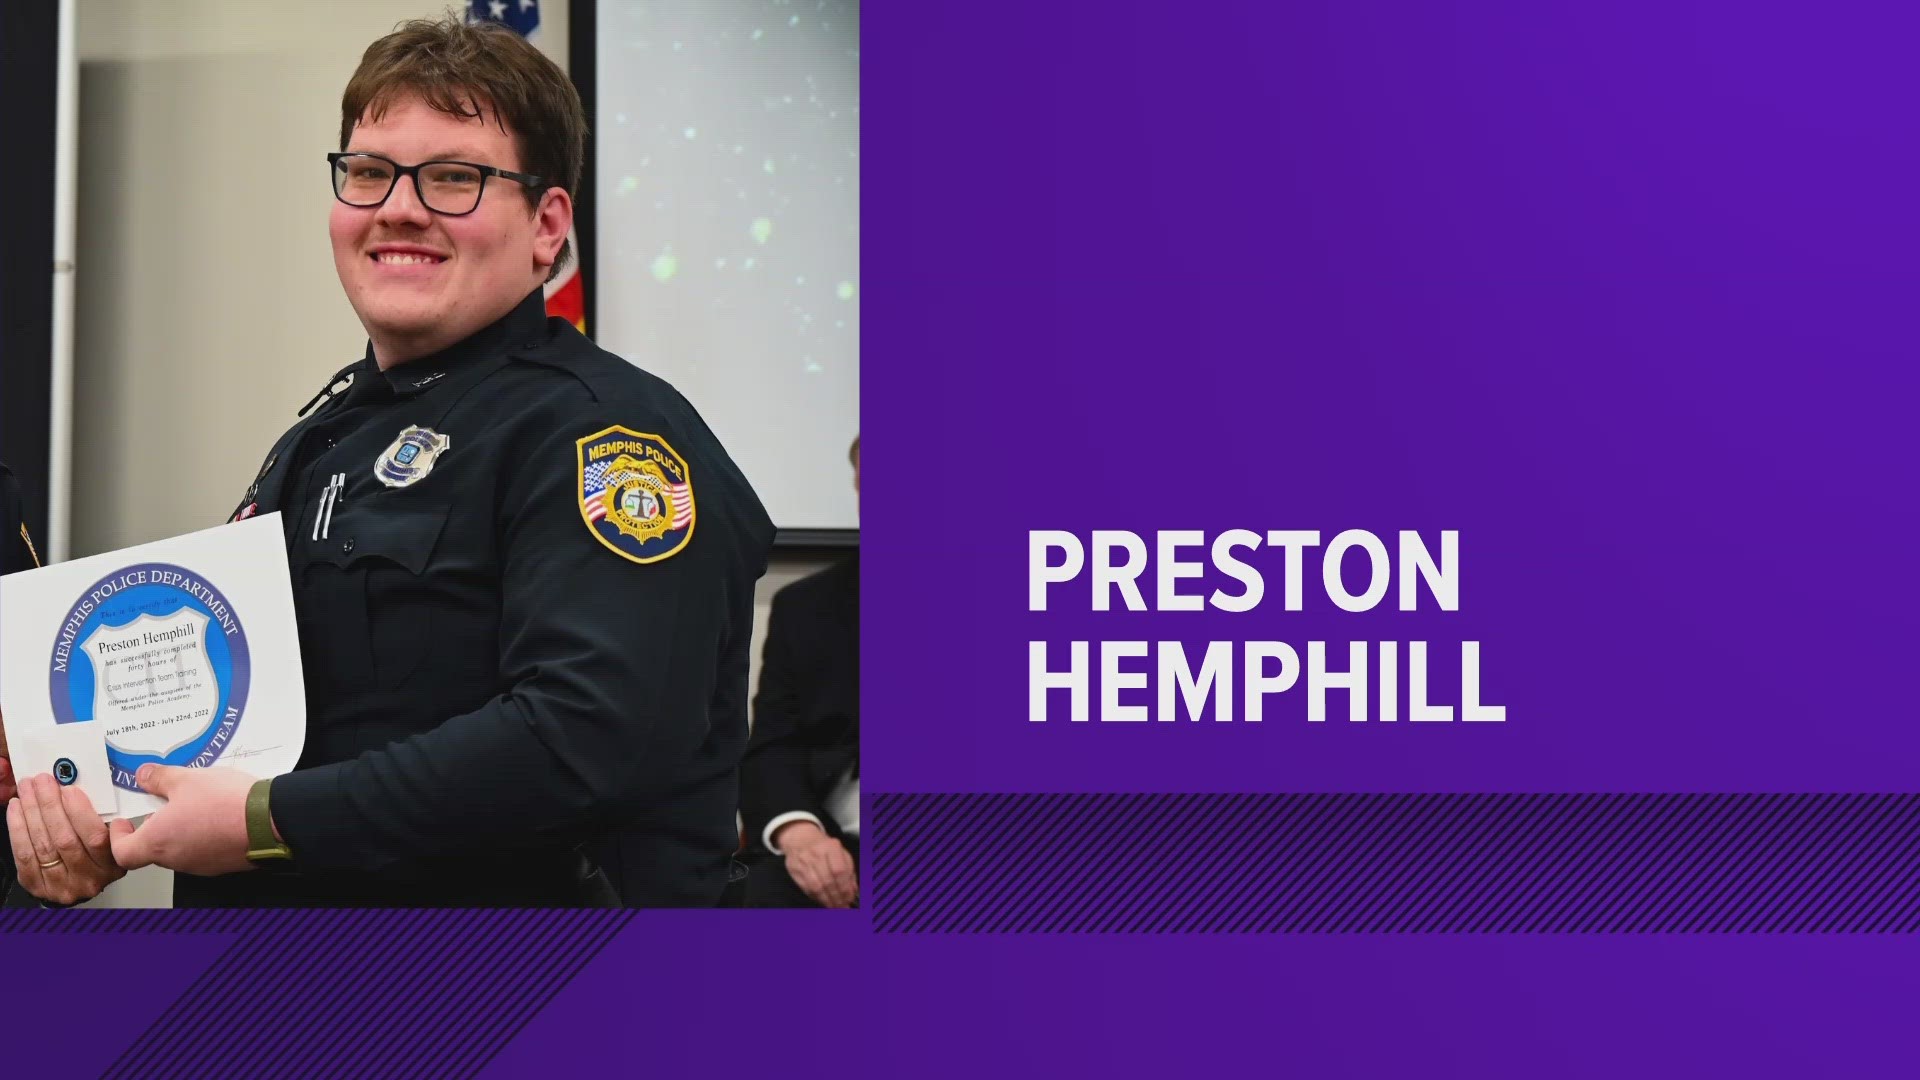 P.O.S.T said during a hearing Thursday that Preston Hemphill’s certification is suspended until the conclusion of all investigations.